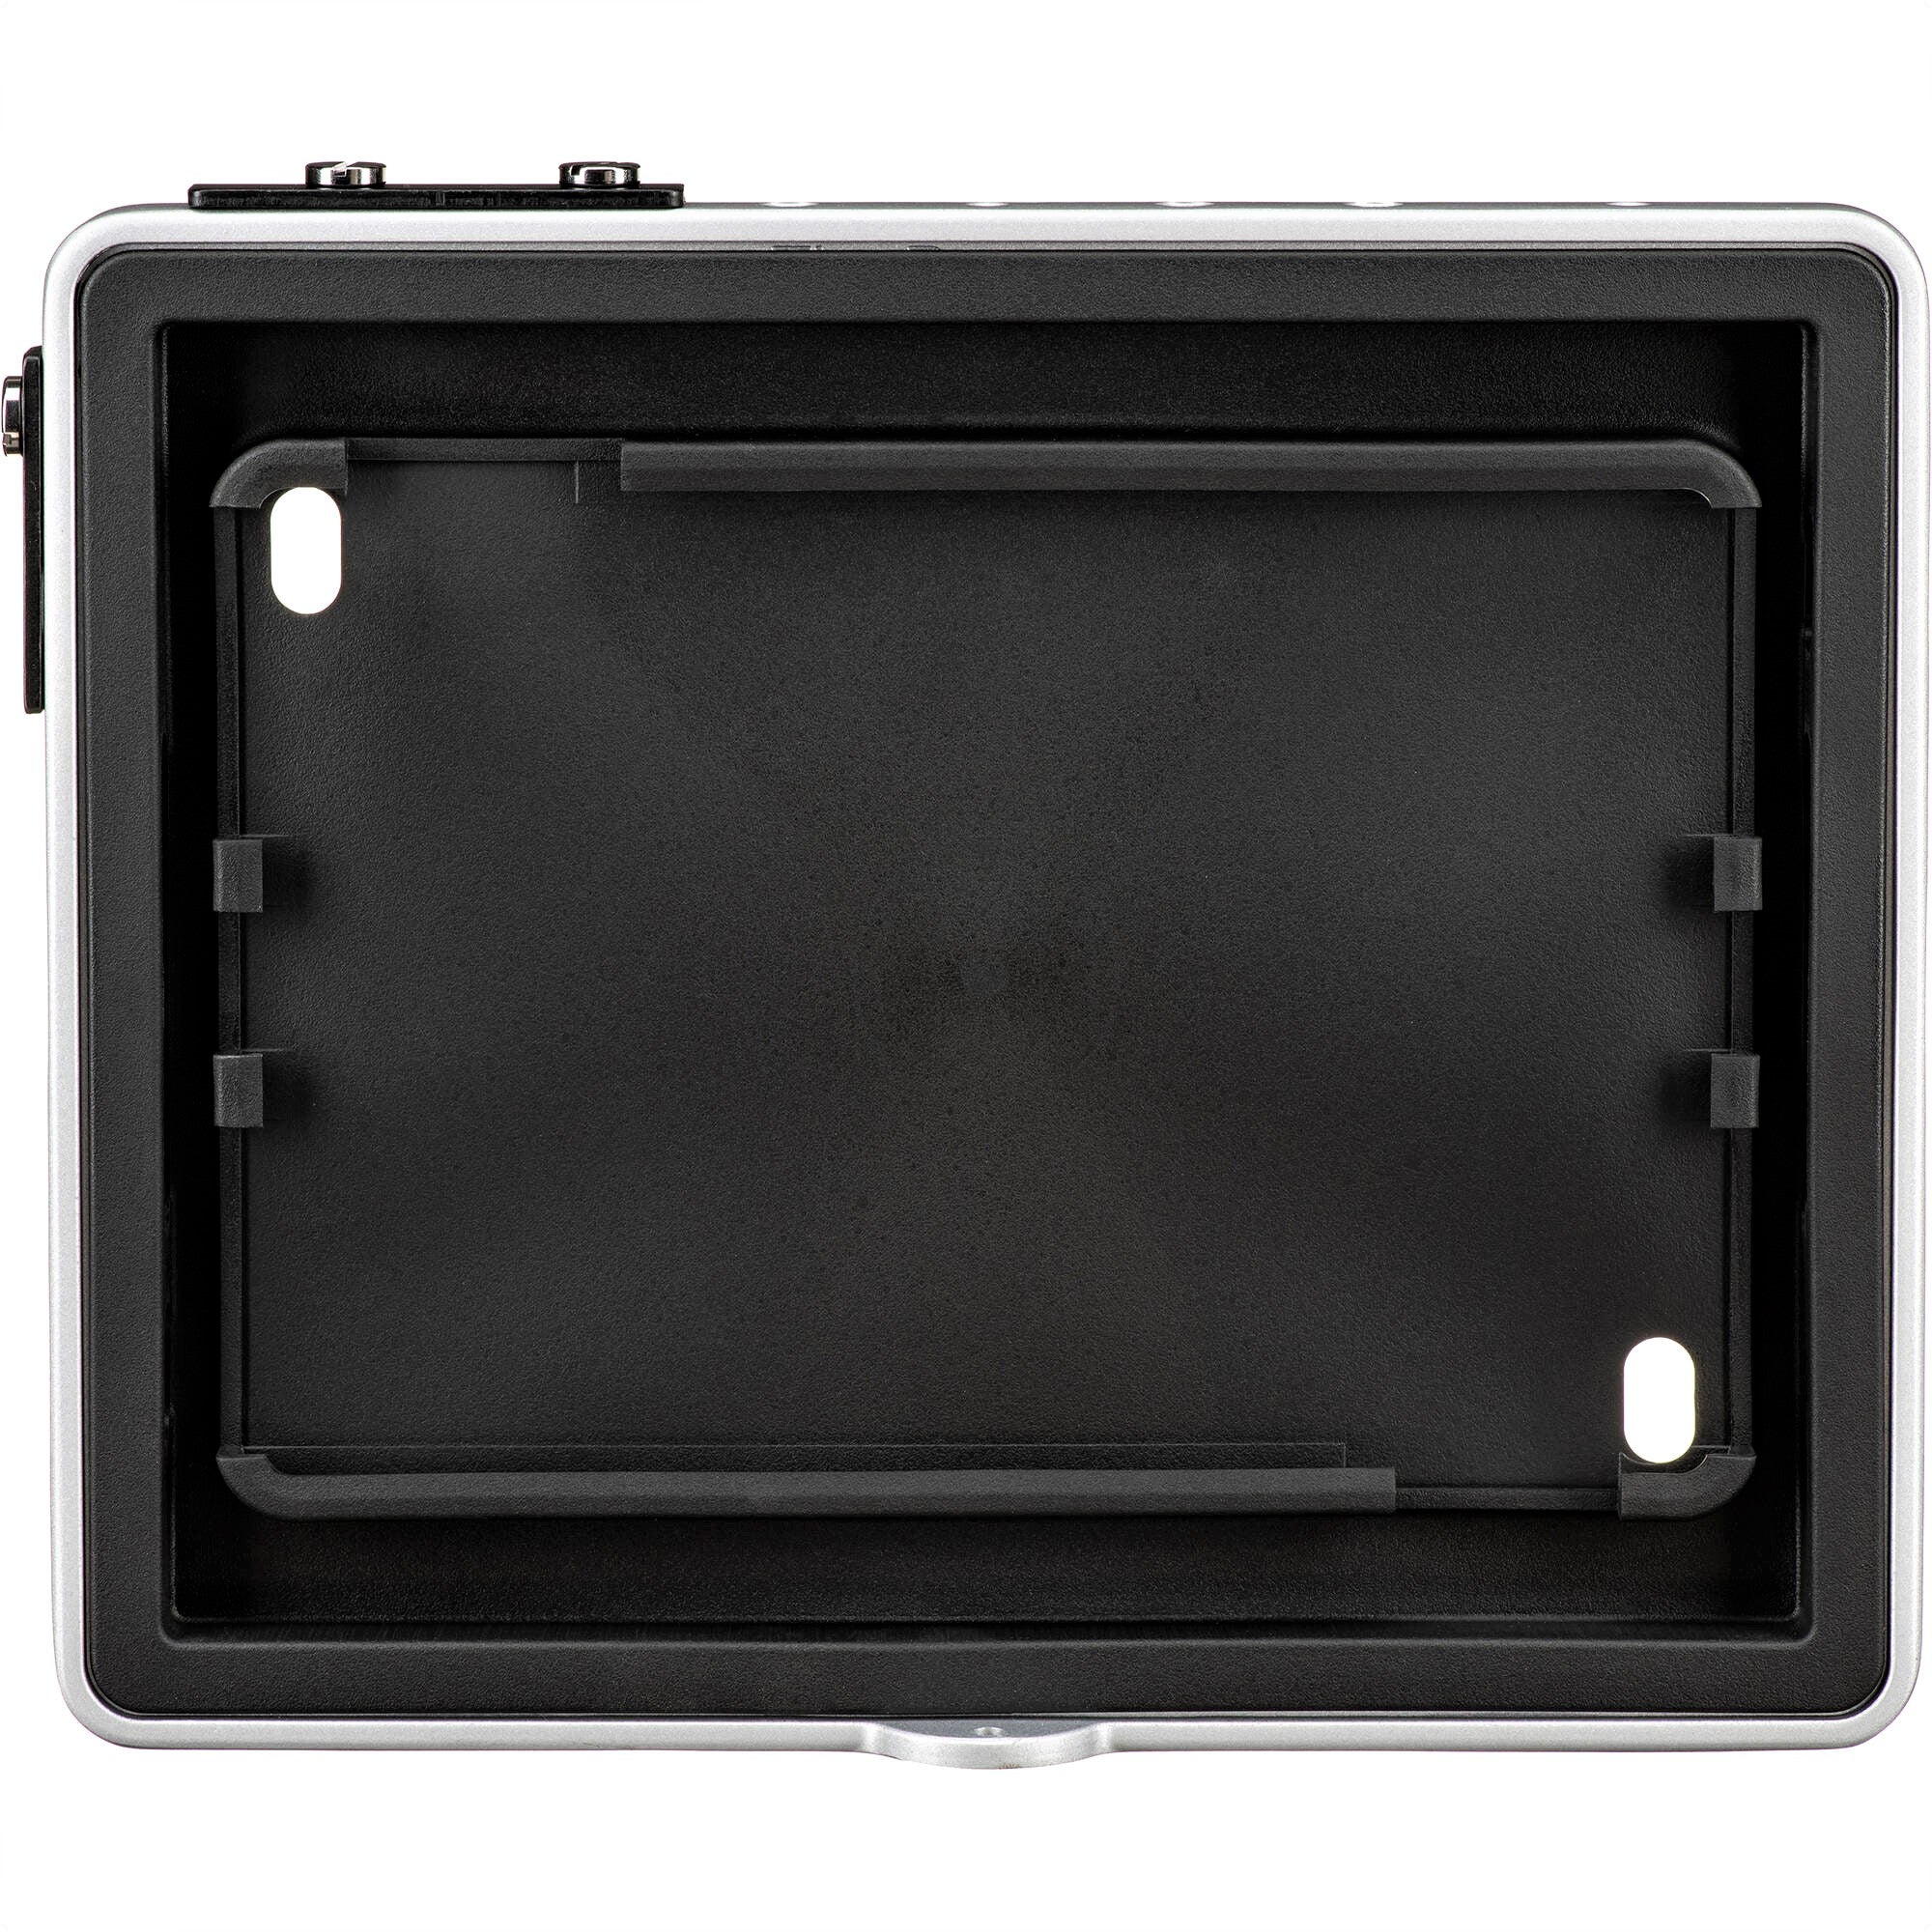 Padcaster Case for iPad 7th Gen 10.2 in a Front View